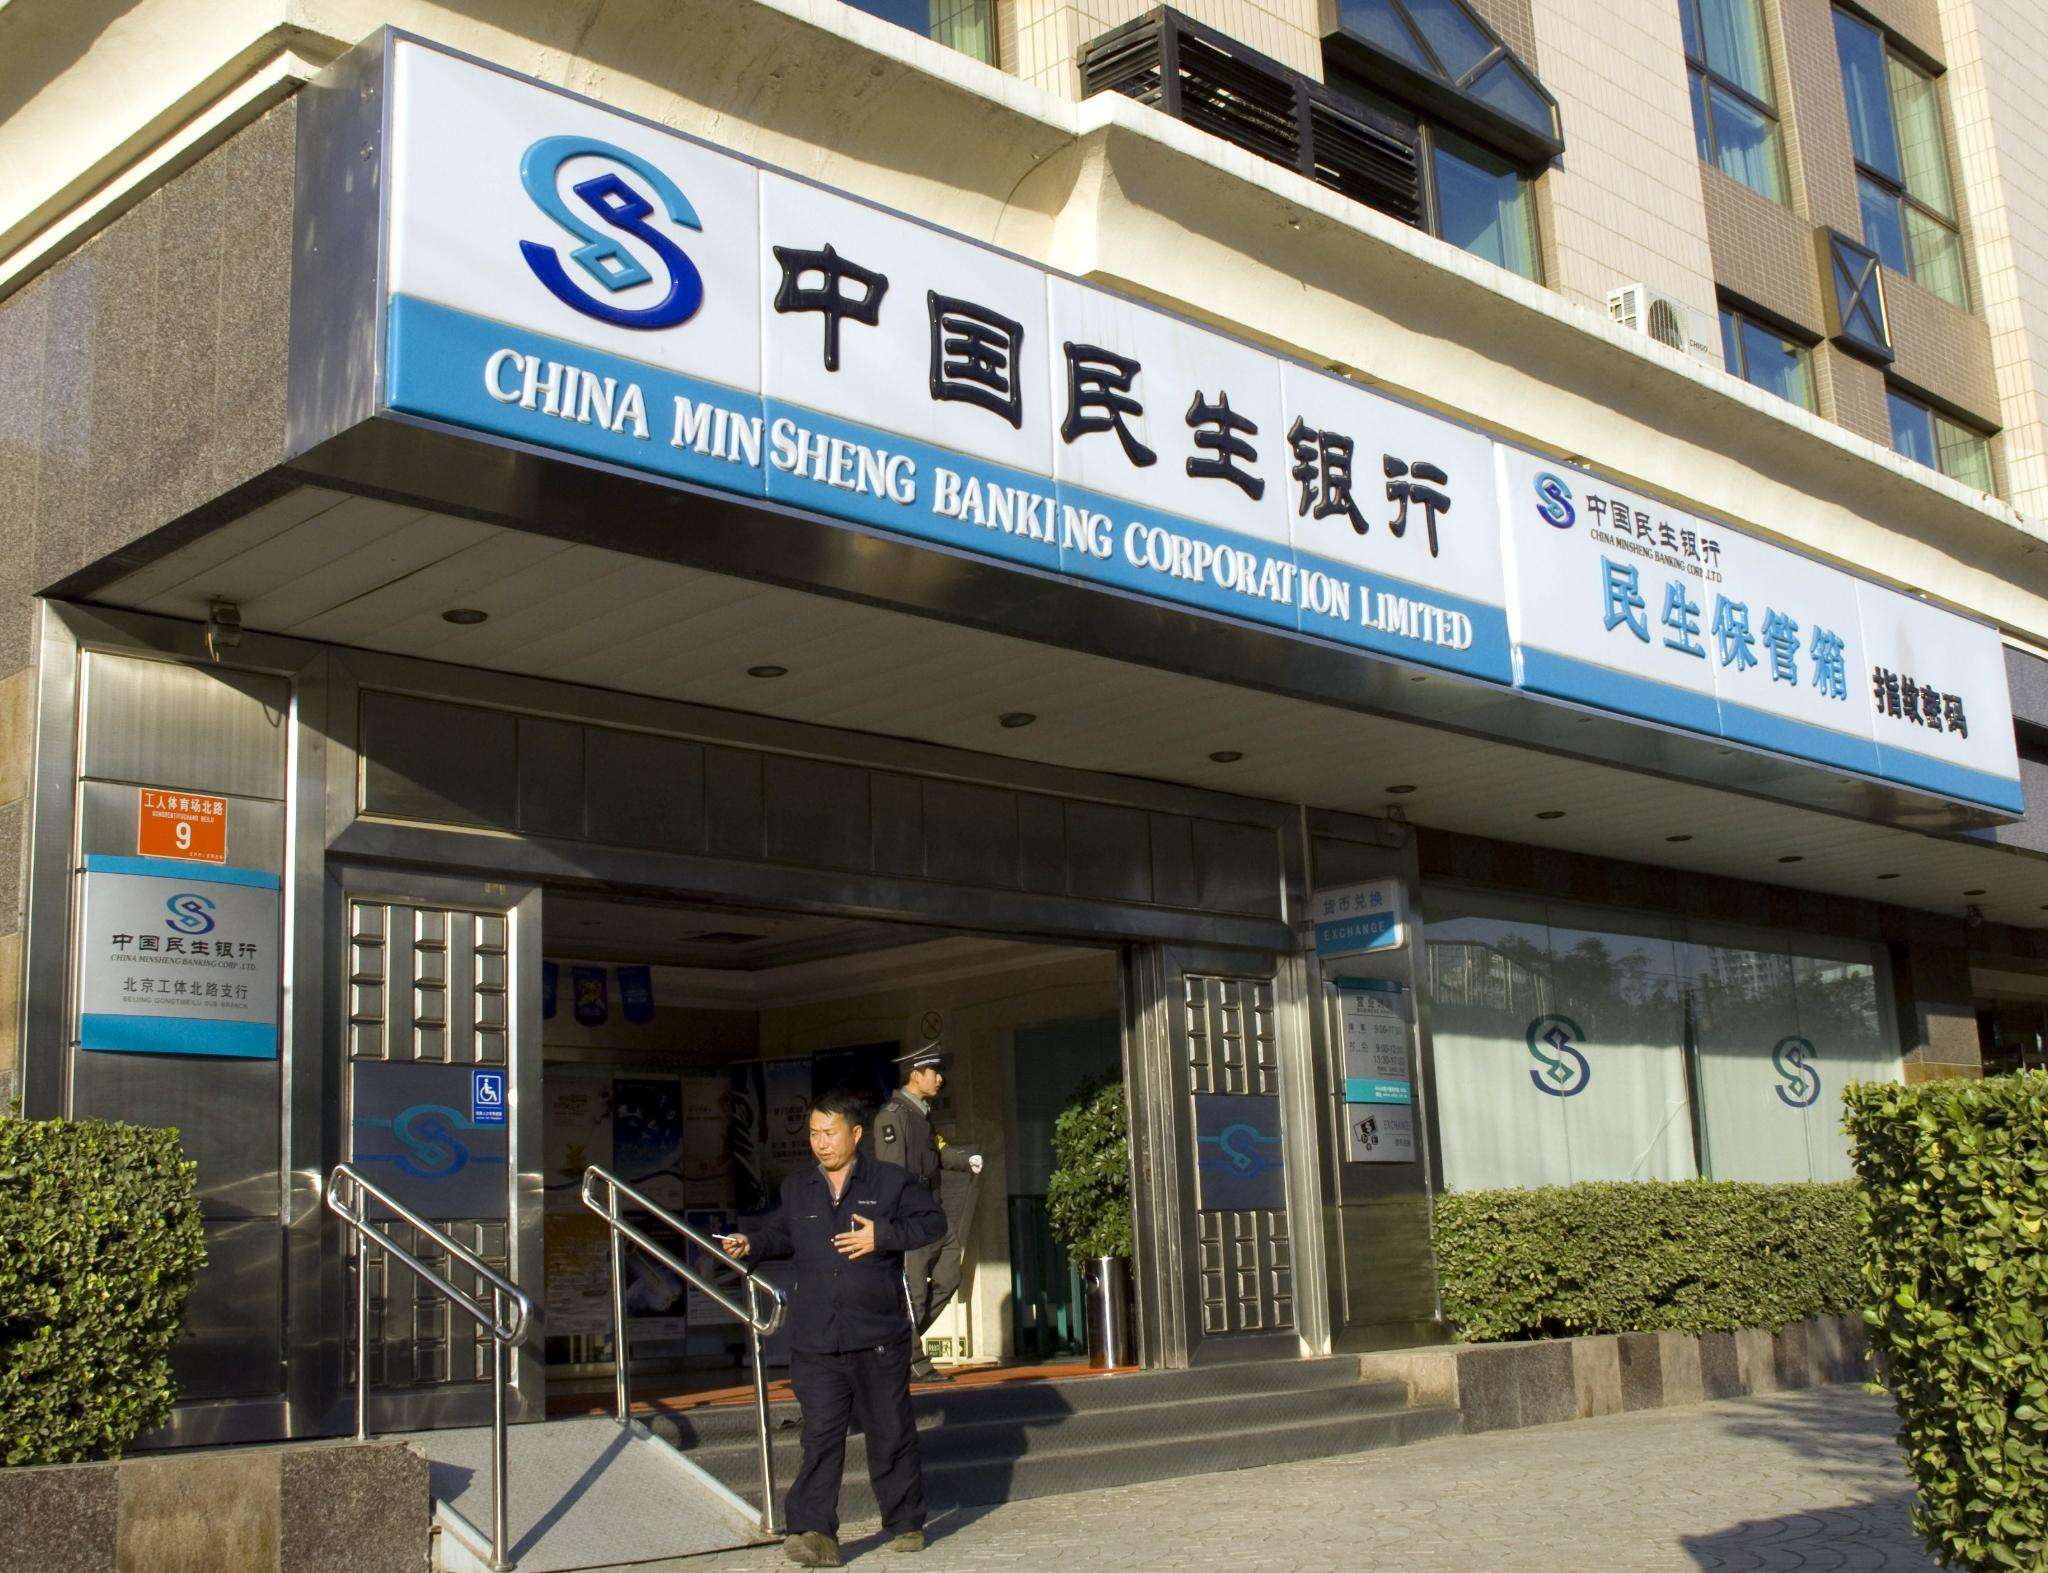 A battle amongst substantial shareholders for control of Minsheng Bank continues, prompting analysts’ concerns about effective leadership at the mid-sized lender